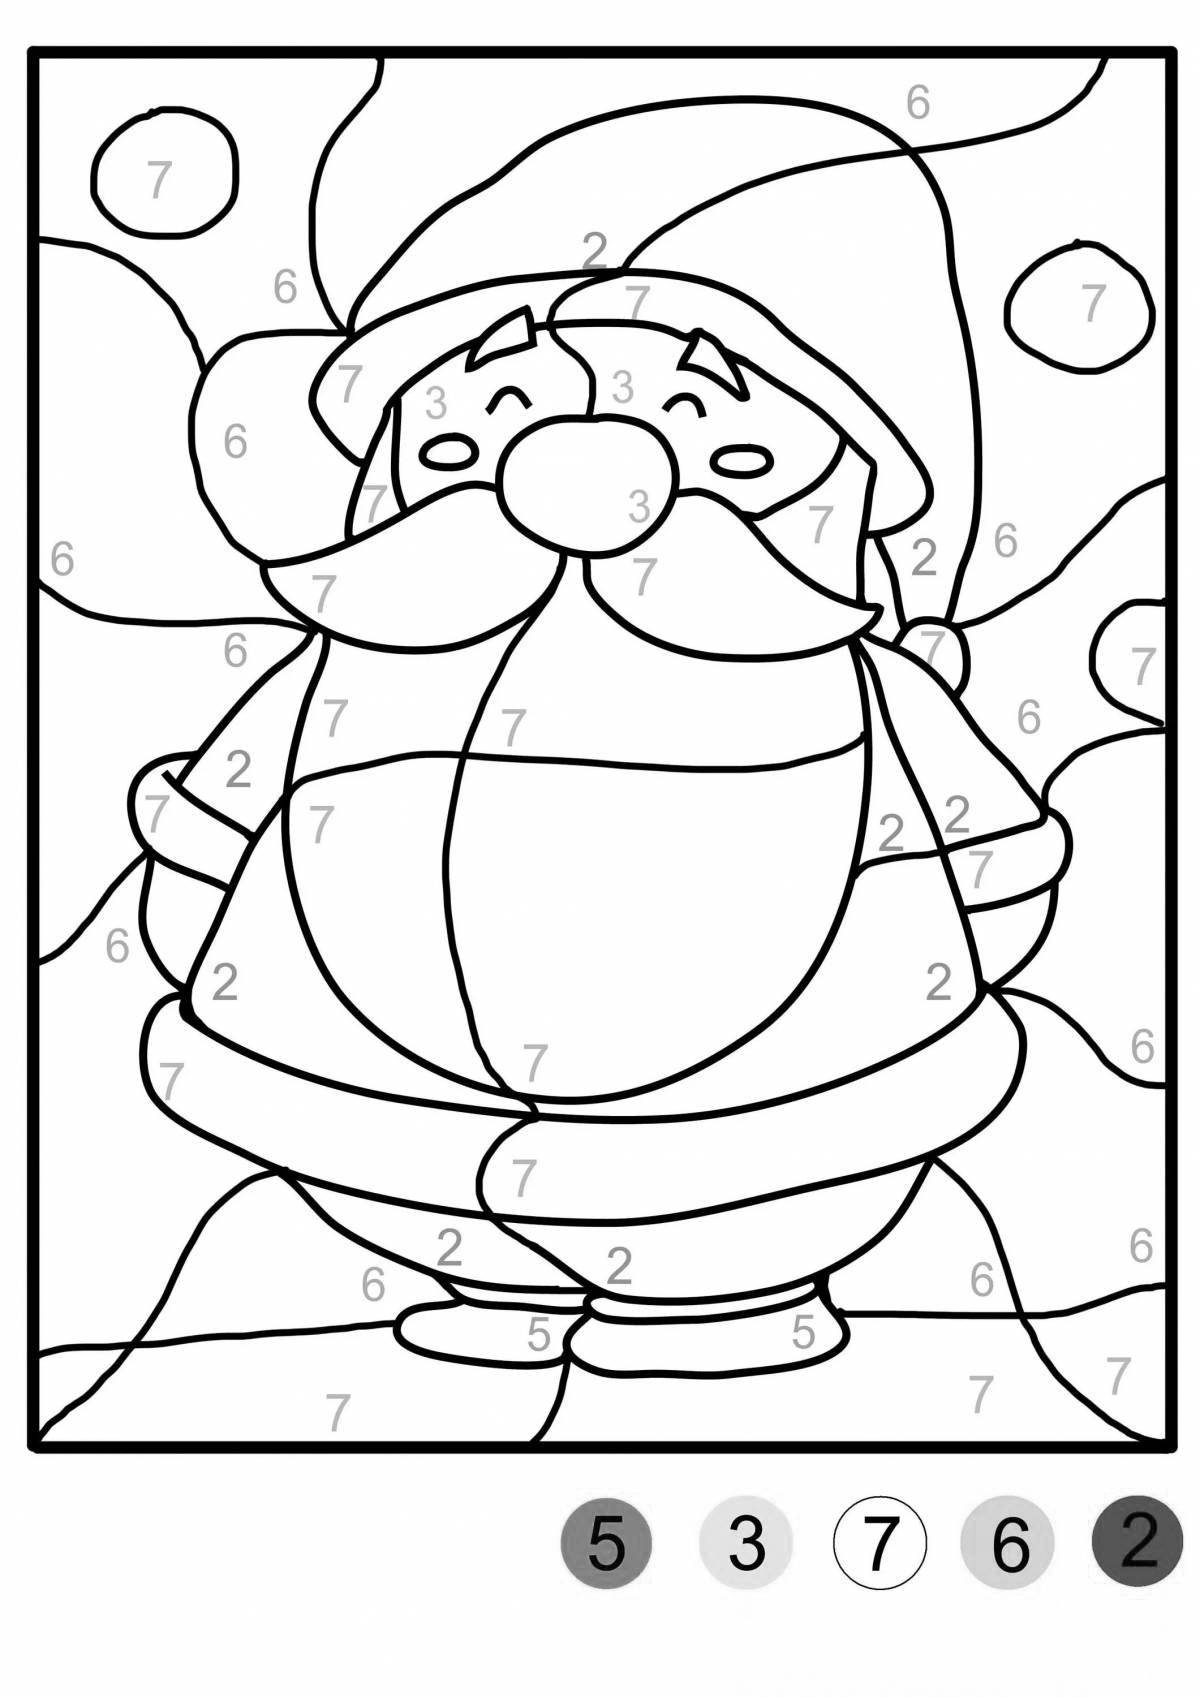 Christmas in numbers coloring pages